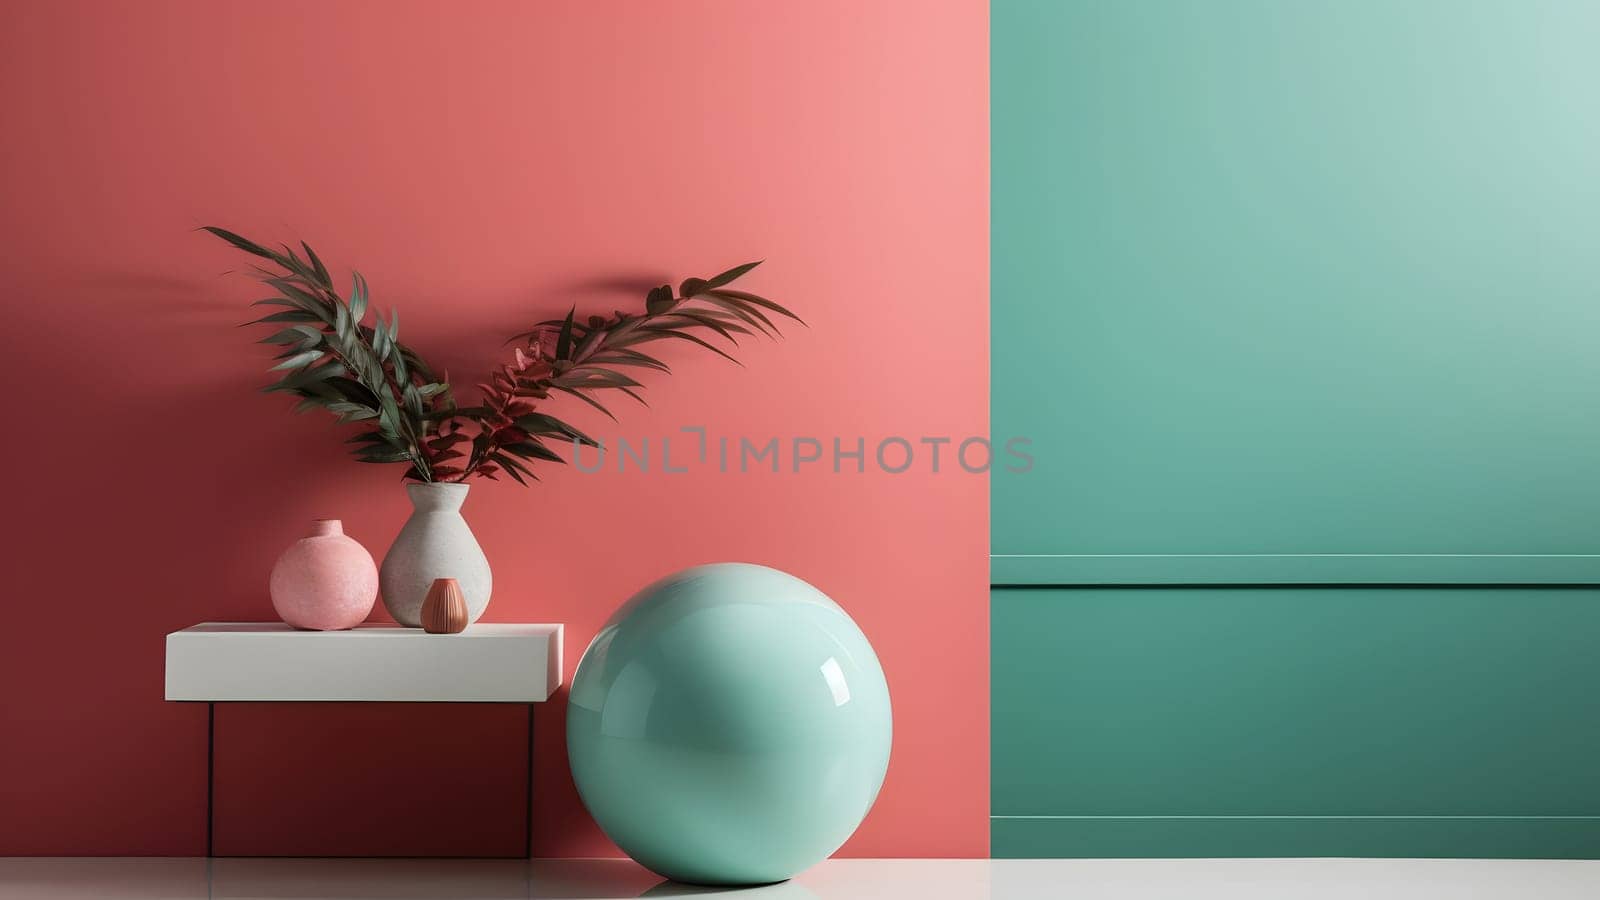 minimalistic composition scene with turquoise semigloss ball on white floor and pastel coral pink wall near a vase with green plant, neural network generated art by z1b